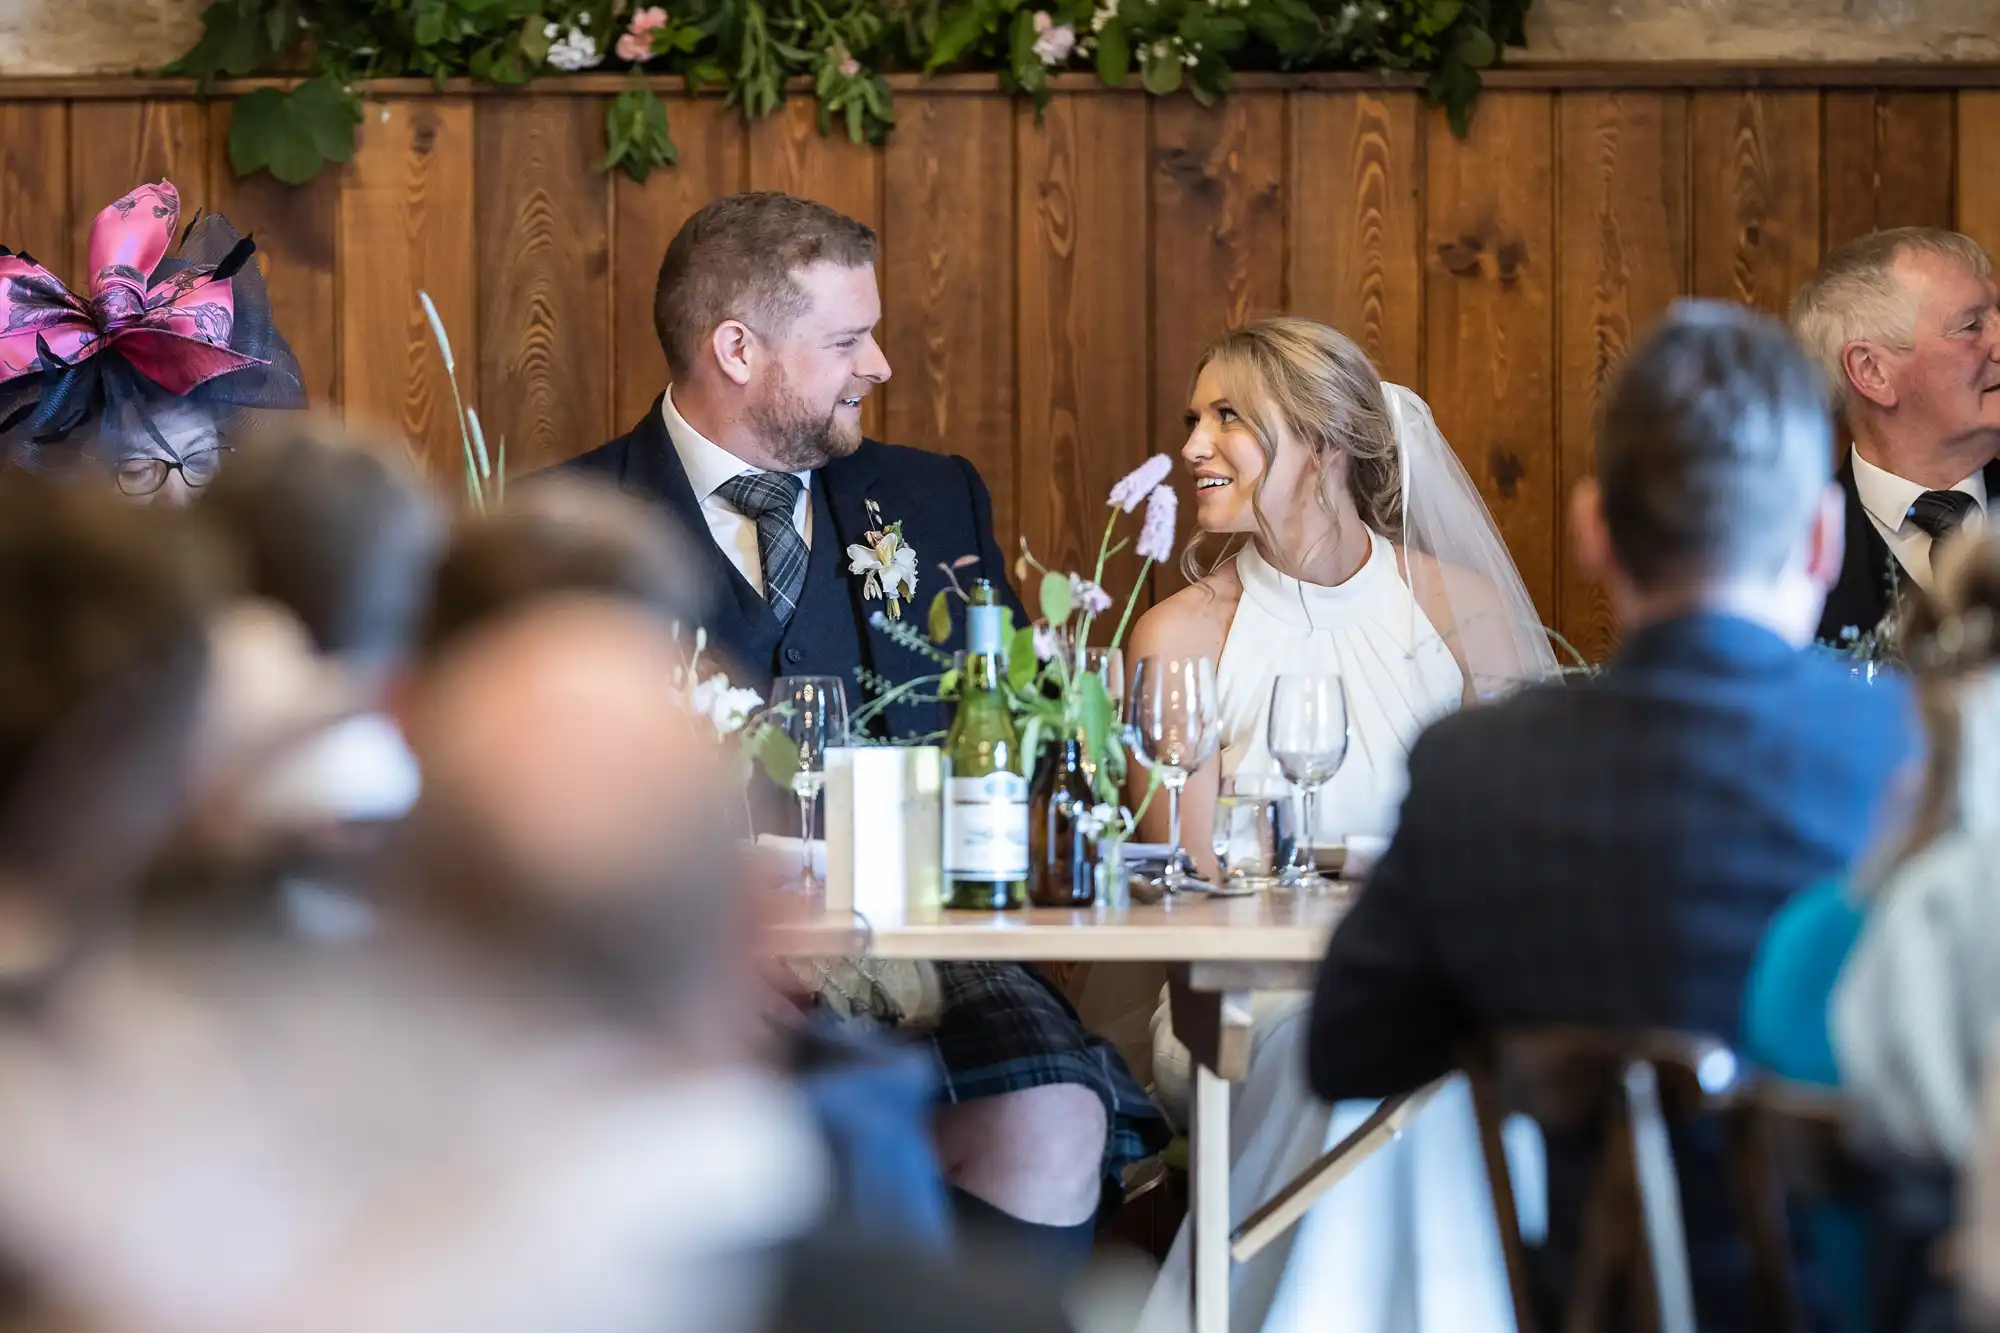 A bride and groom smiling at each other at a wedding reception table, surrounded by guests and rustic decor.